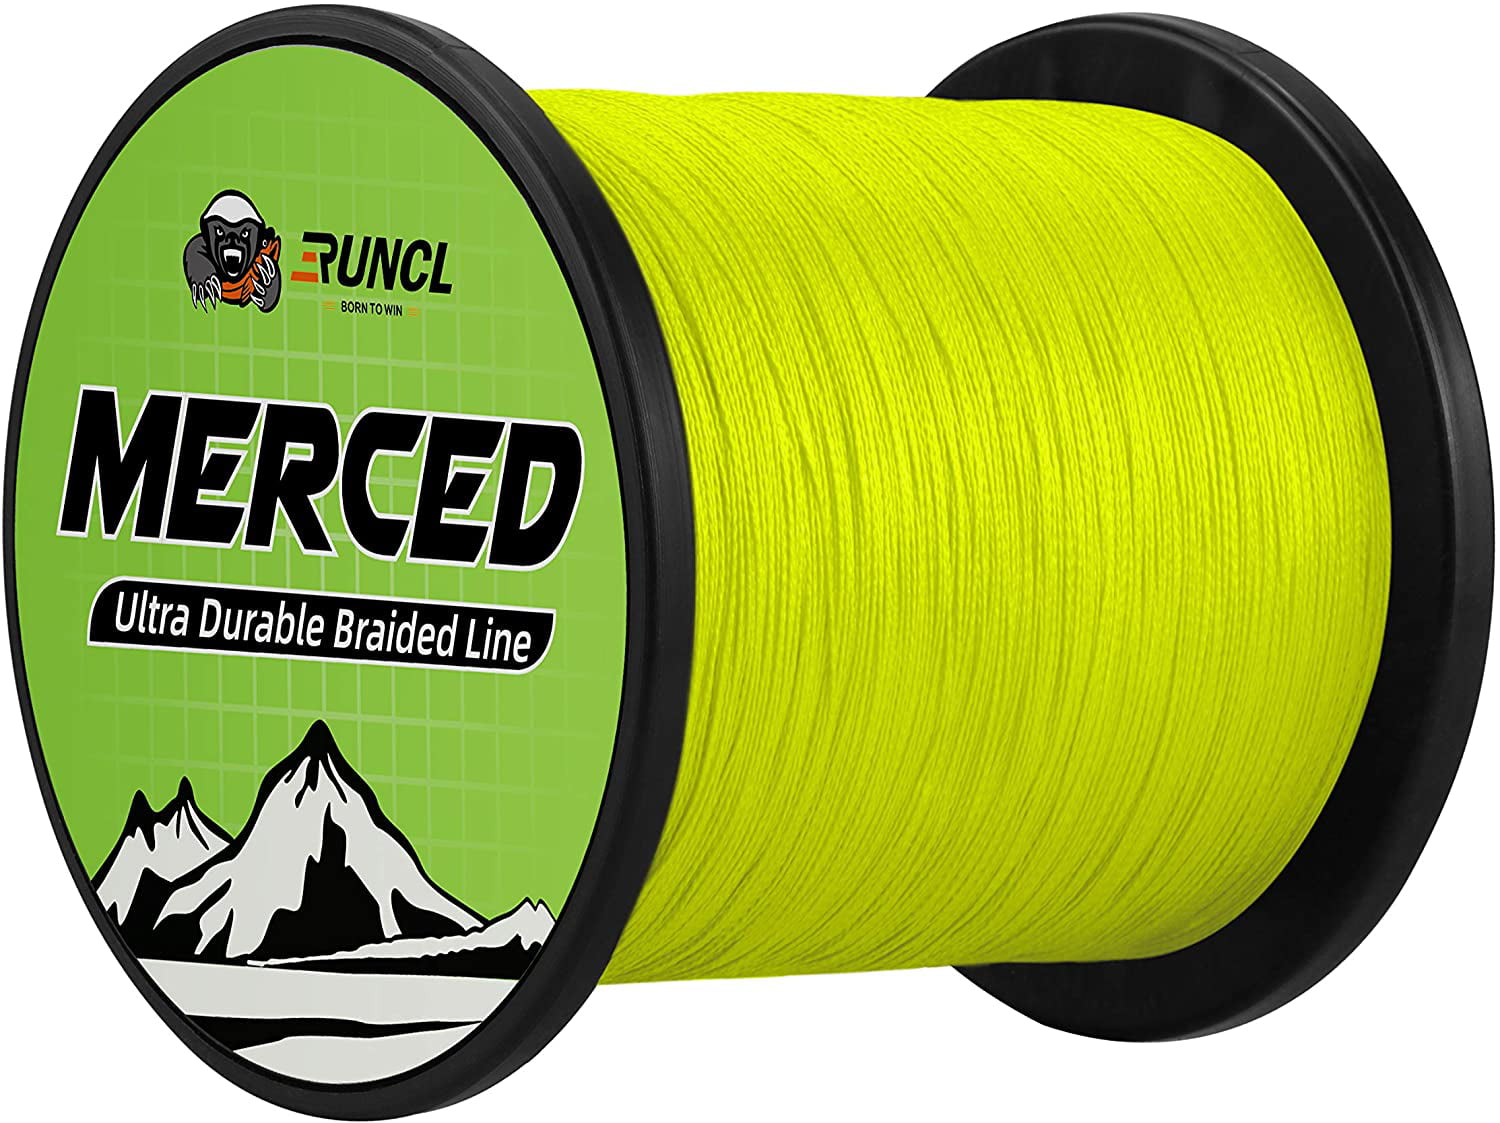 Thin-Coating Tech 1000 500 300 Yards Braided Line 4 8 Strands Fishing Line for Freshwater Saltwater Stronger Smoother Proprietary Weaving Tech RUNCL Braided Fishing Line Merced 6-200LB 